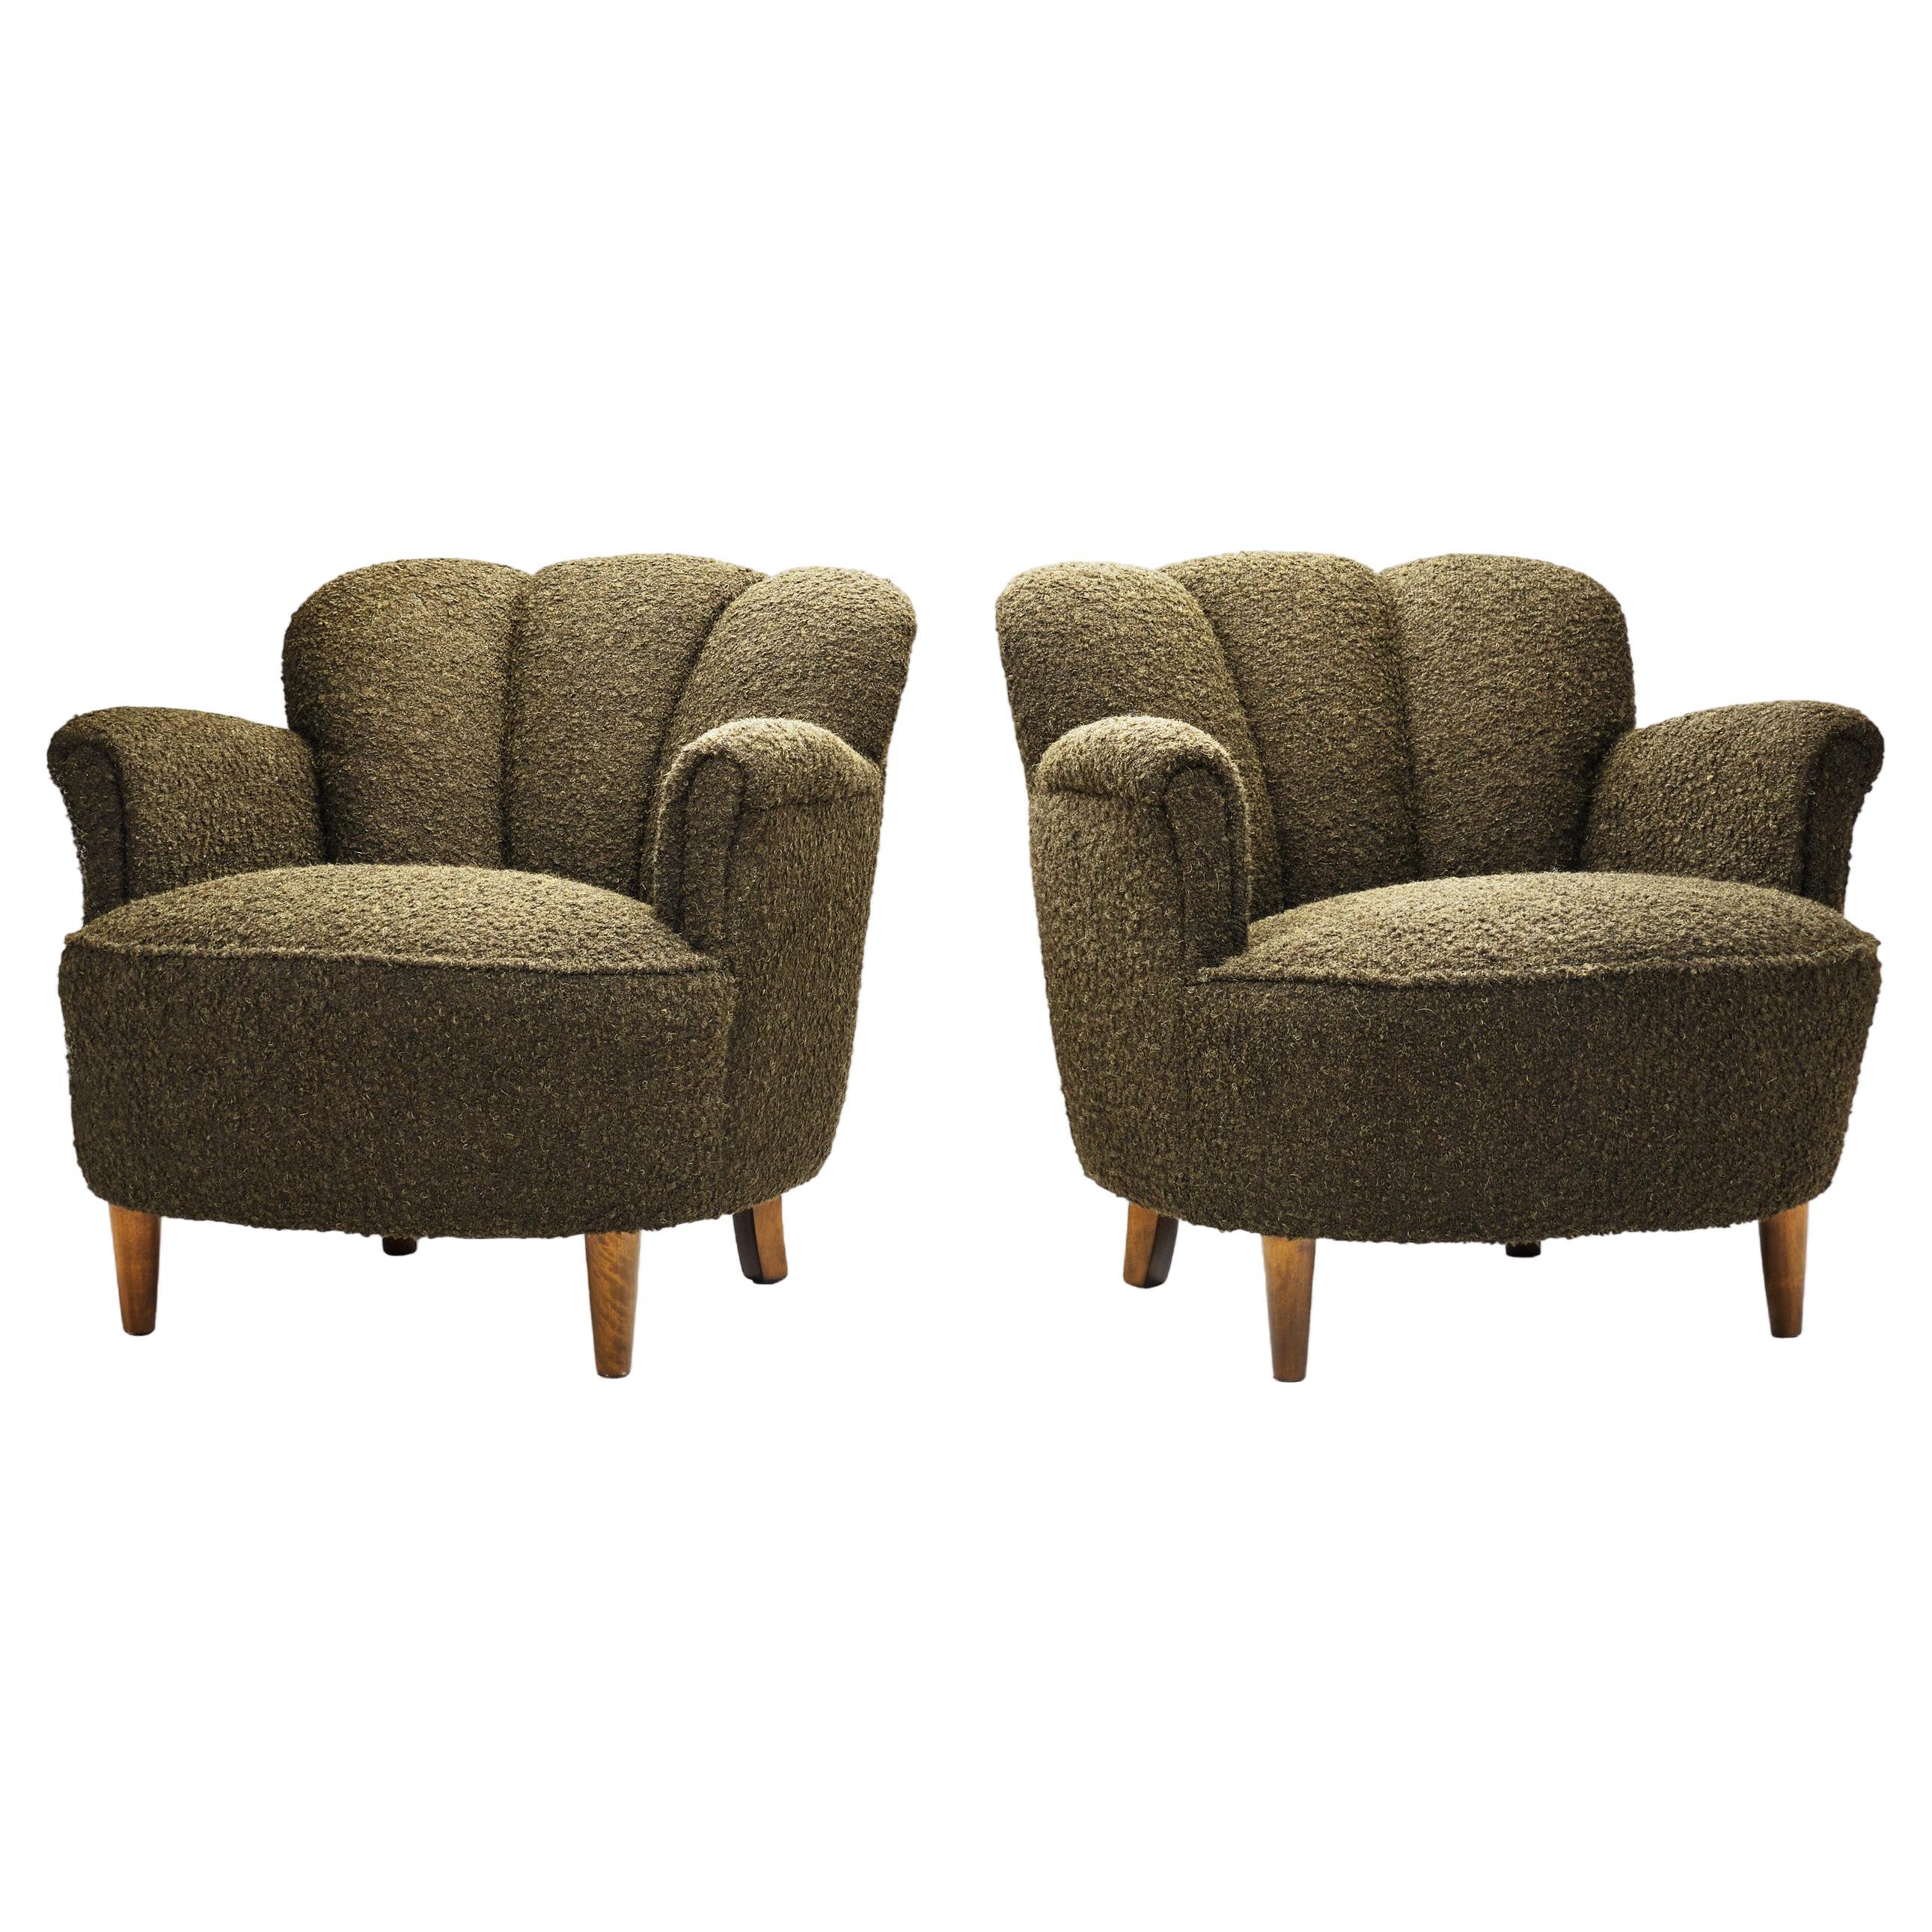 European Upholstered Art Deco Lounge Chairs, Europe 1930s For Sale